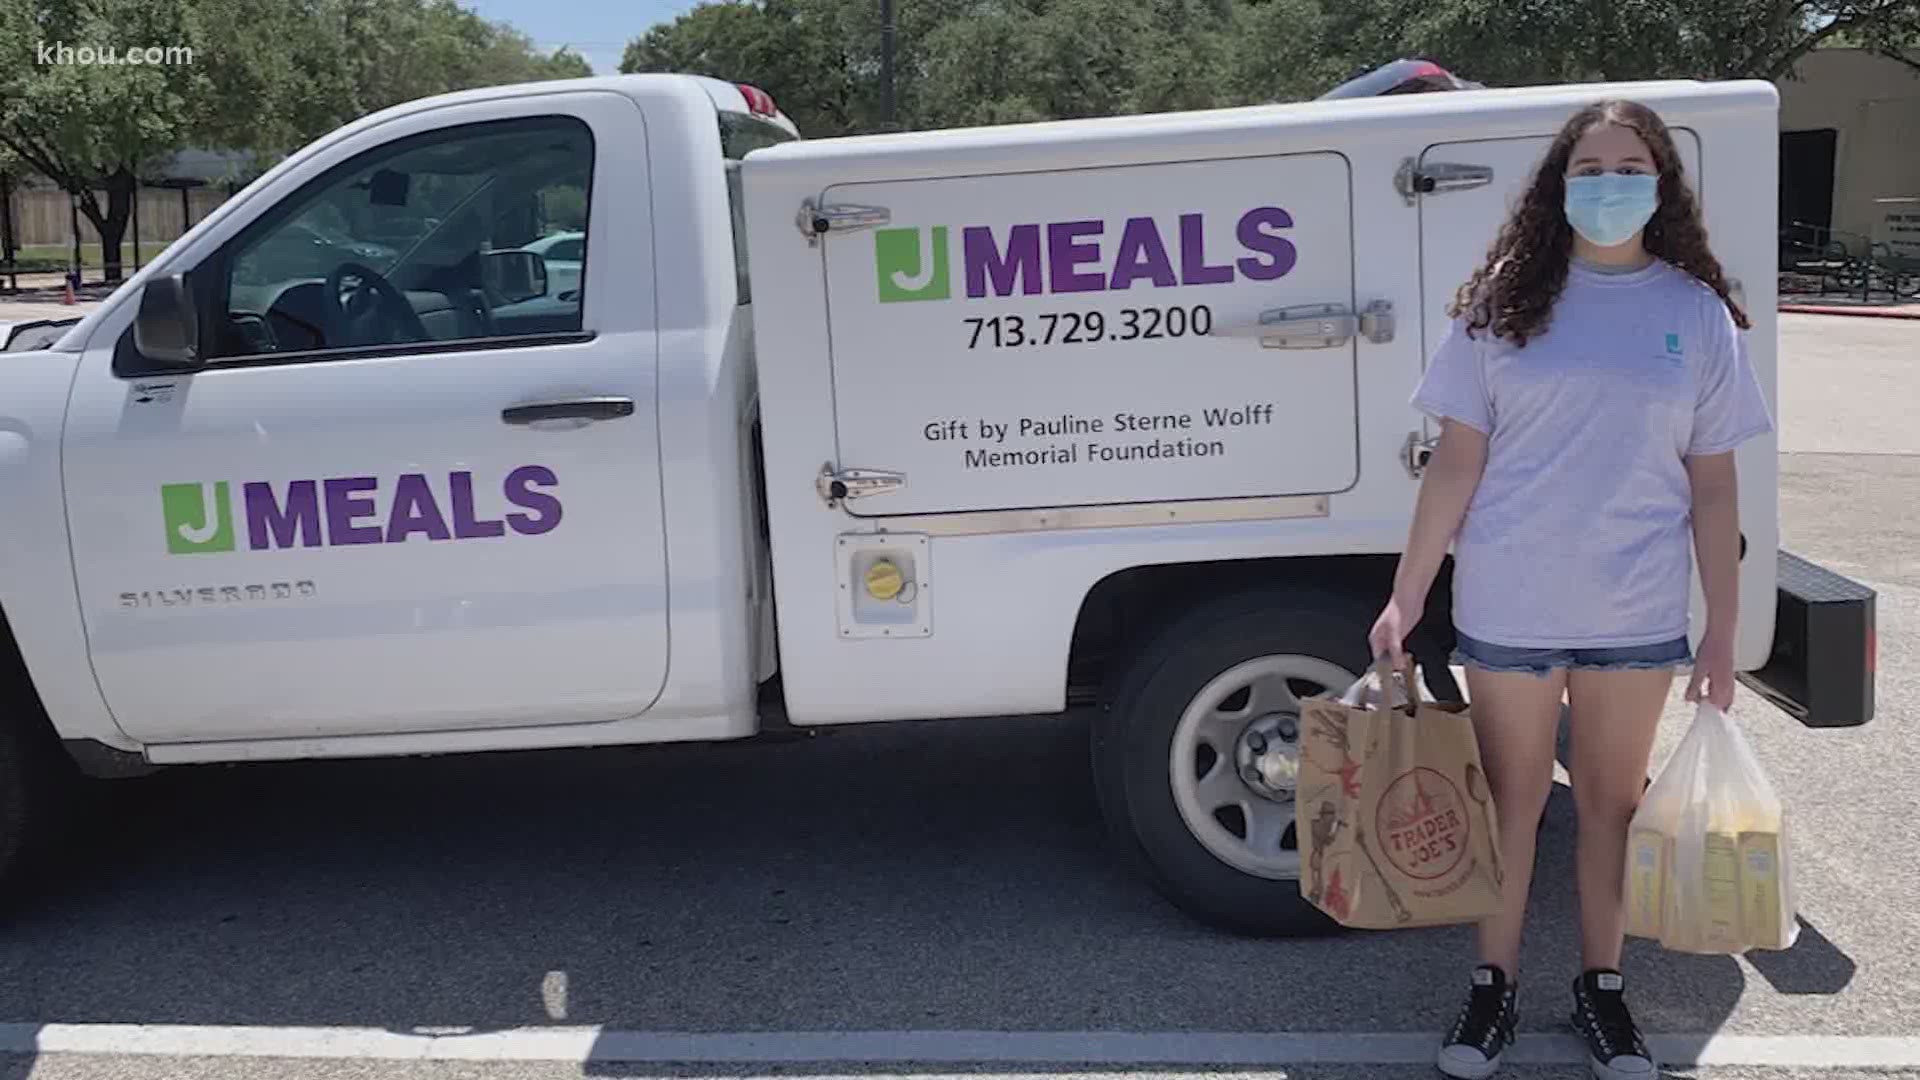 Chloe Lewin chose Meals on Wheels because the program helped her grandmother.